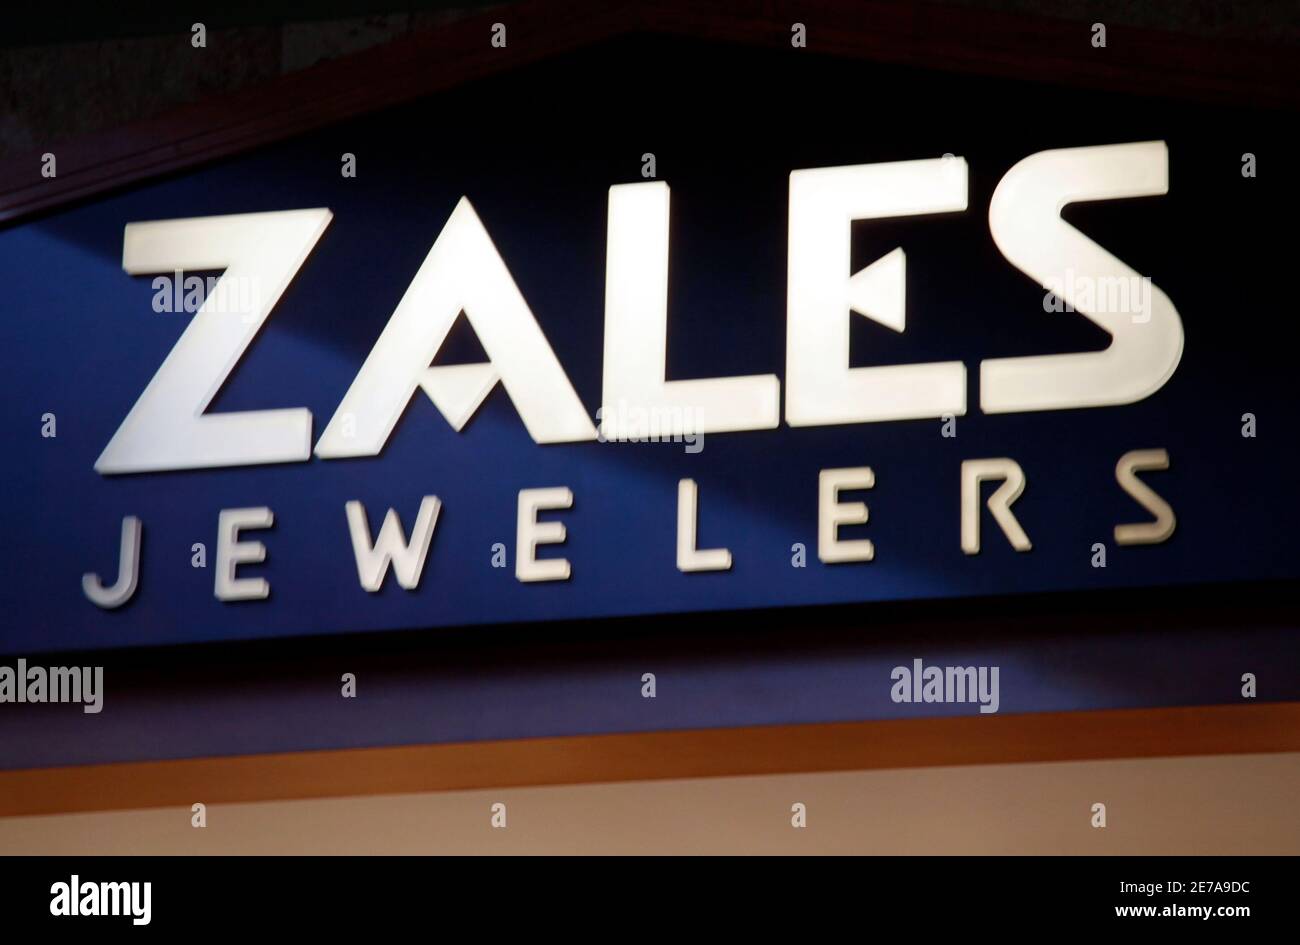 The sign for the Zale jewelry store is seen in Broomfield, Colorado September 9, 2009. Jewelers like Signet and Zale Corp and even upscale chain Tiffany & Co have faced weak sales as the economic slump has forced shoppers to turn frugal. REUTERS/Rick Wilking (UNITED STATES BUSINESS) Stock Photo